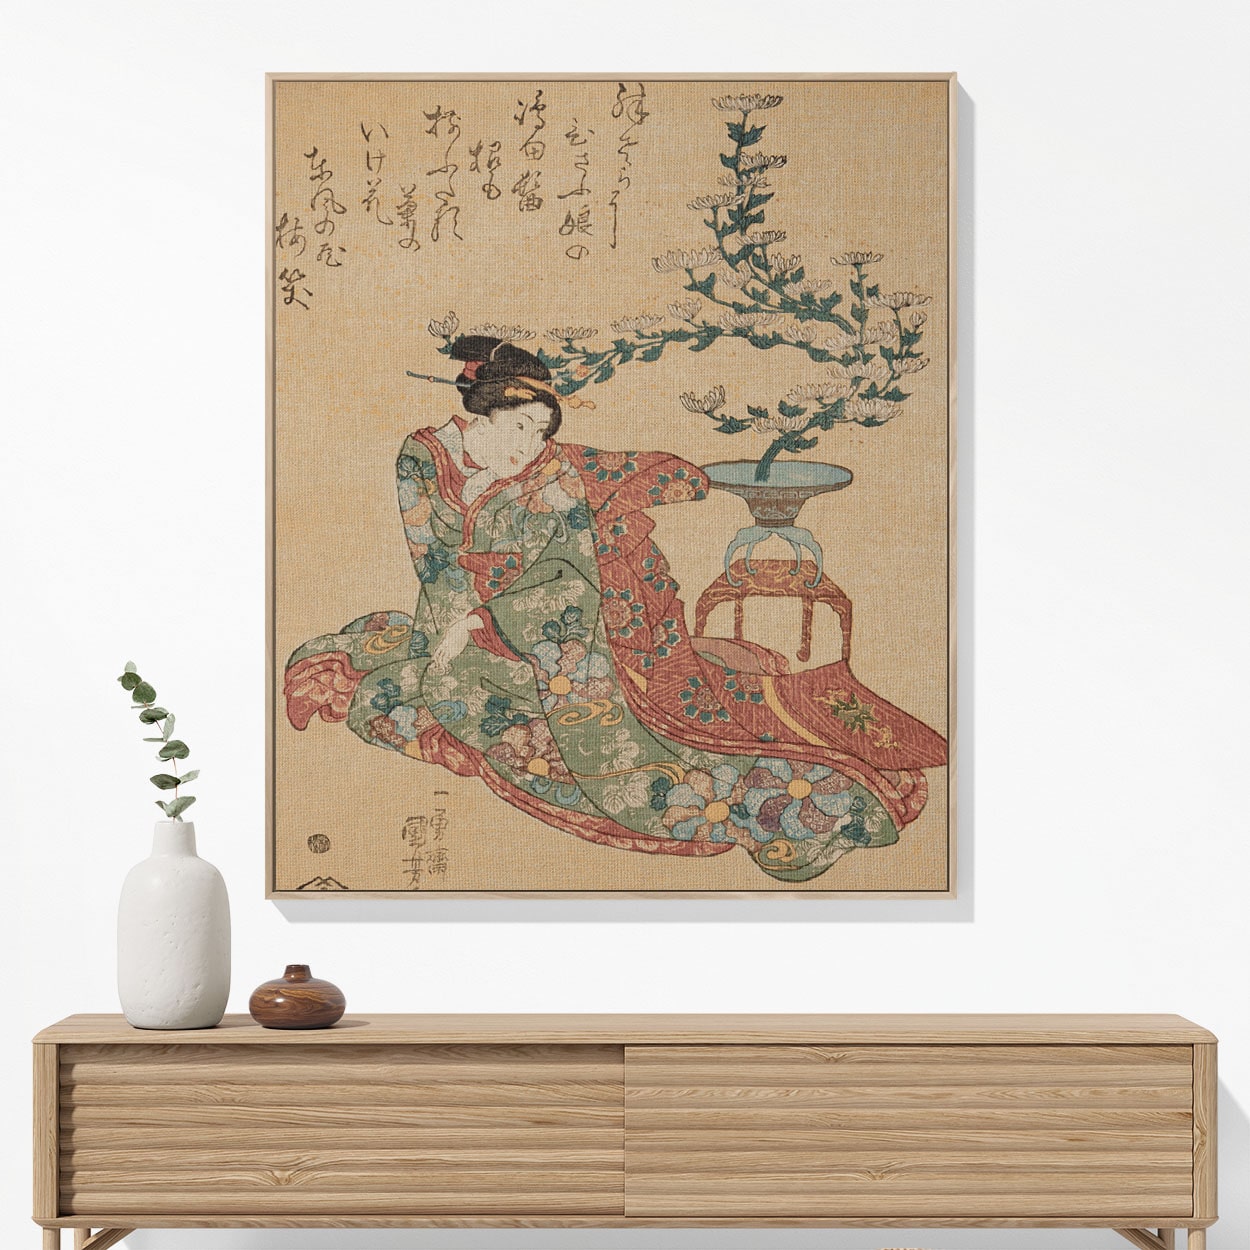 Japanese Aesthetic Woven Blanket Woven Blanket Hanging on a Wall as Framed Wall Art